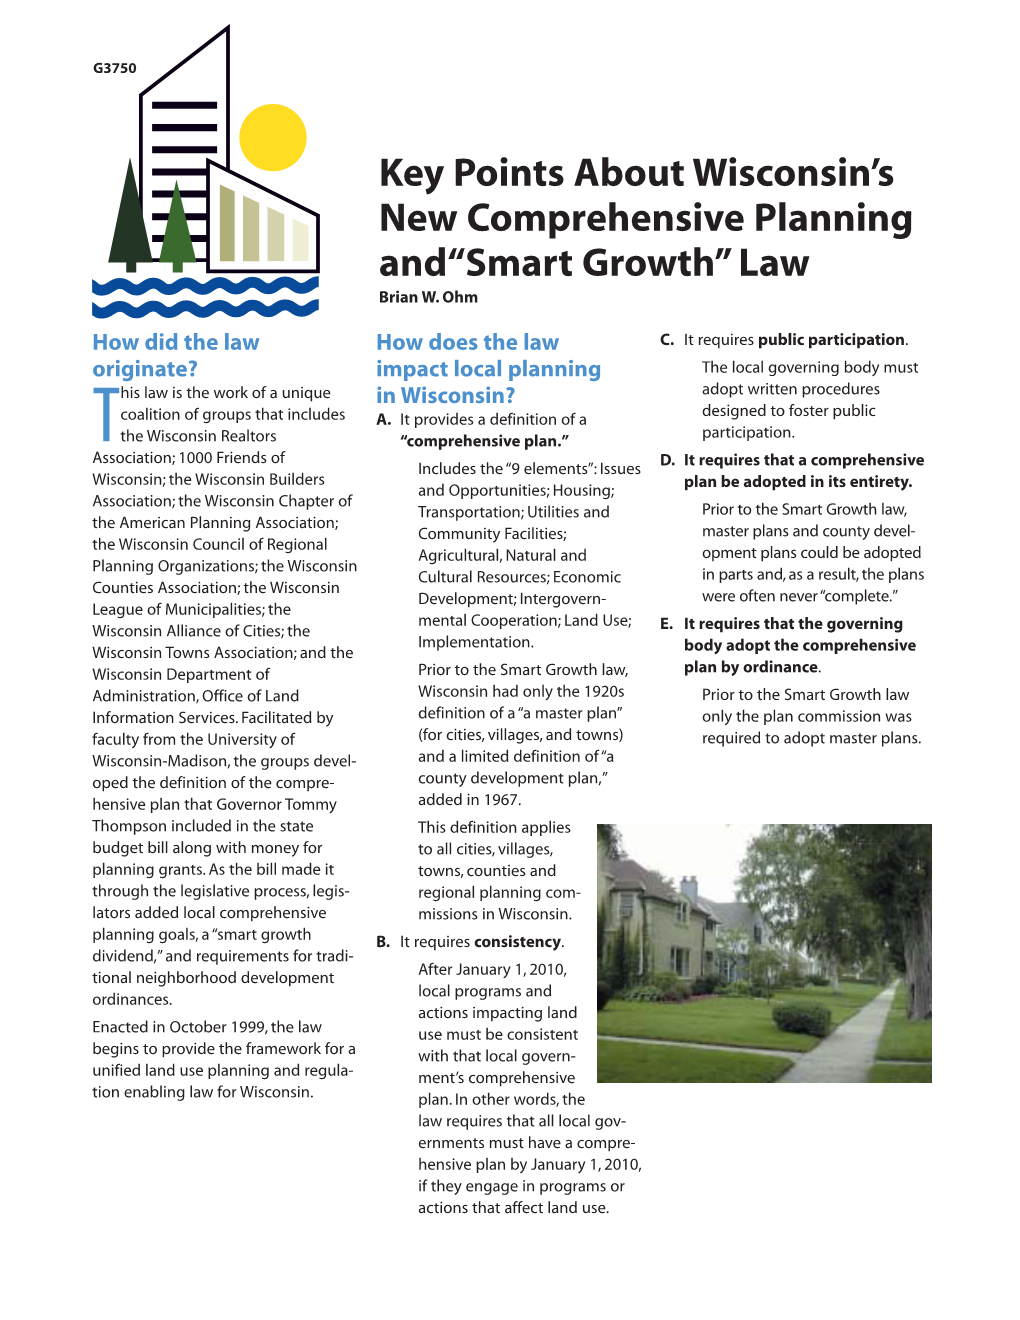 Key Points About Wisconsin's New Comprehensive Planning And